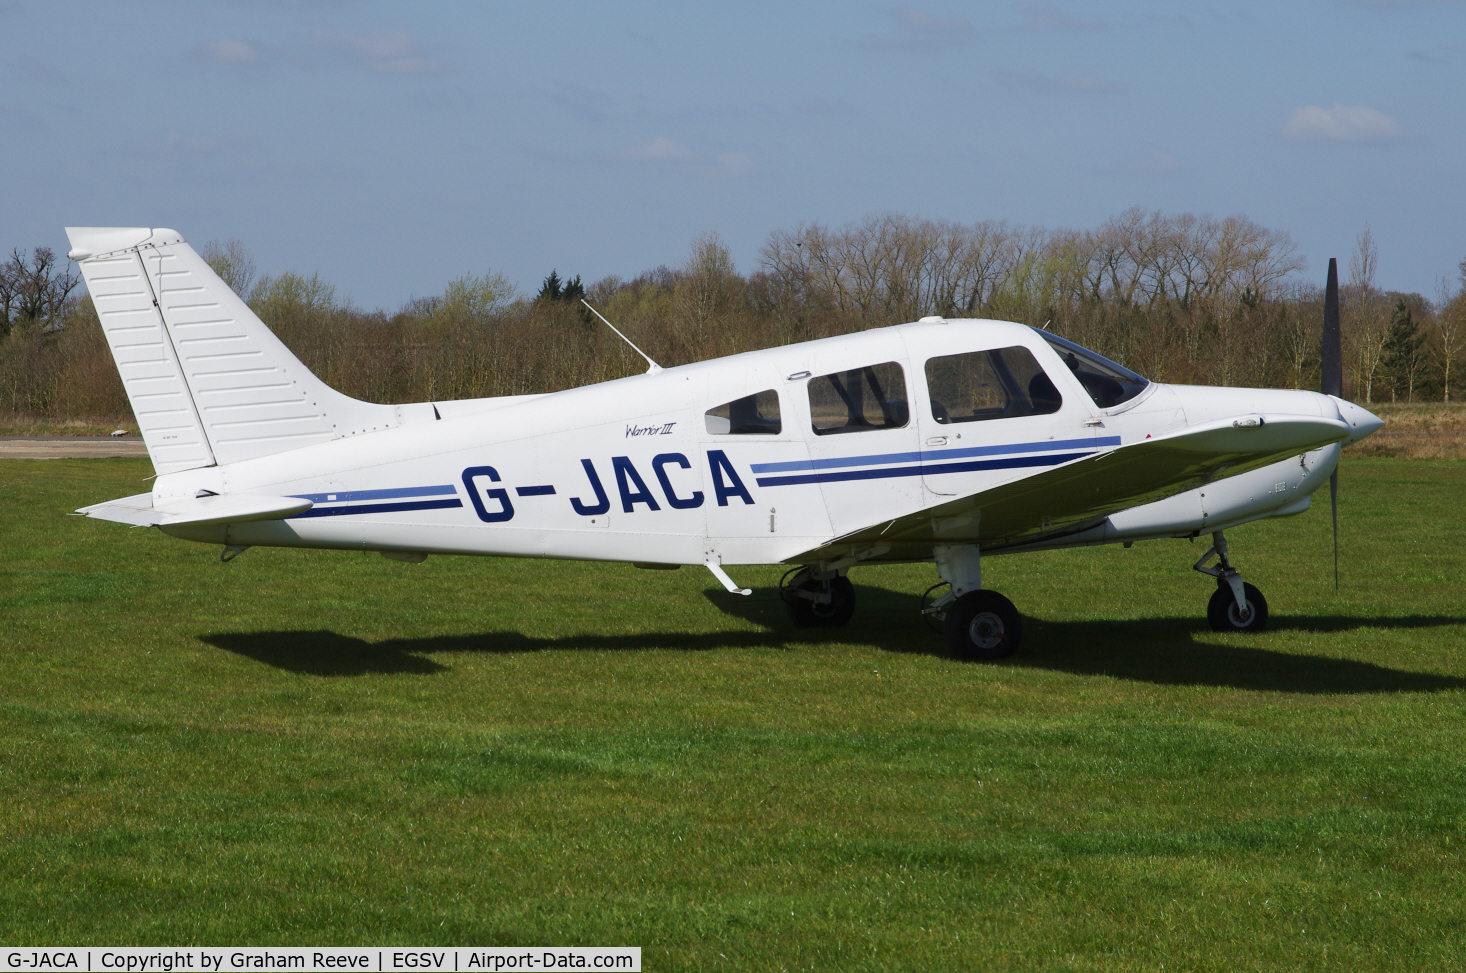 G-JACA, 2001 Piper PA-28-161 Warrior II C/N 28-42139, Paked in the sun.